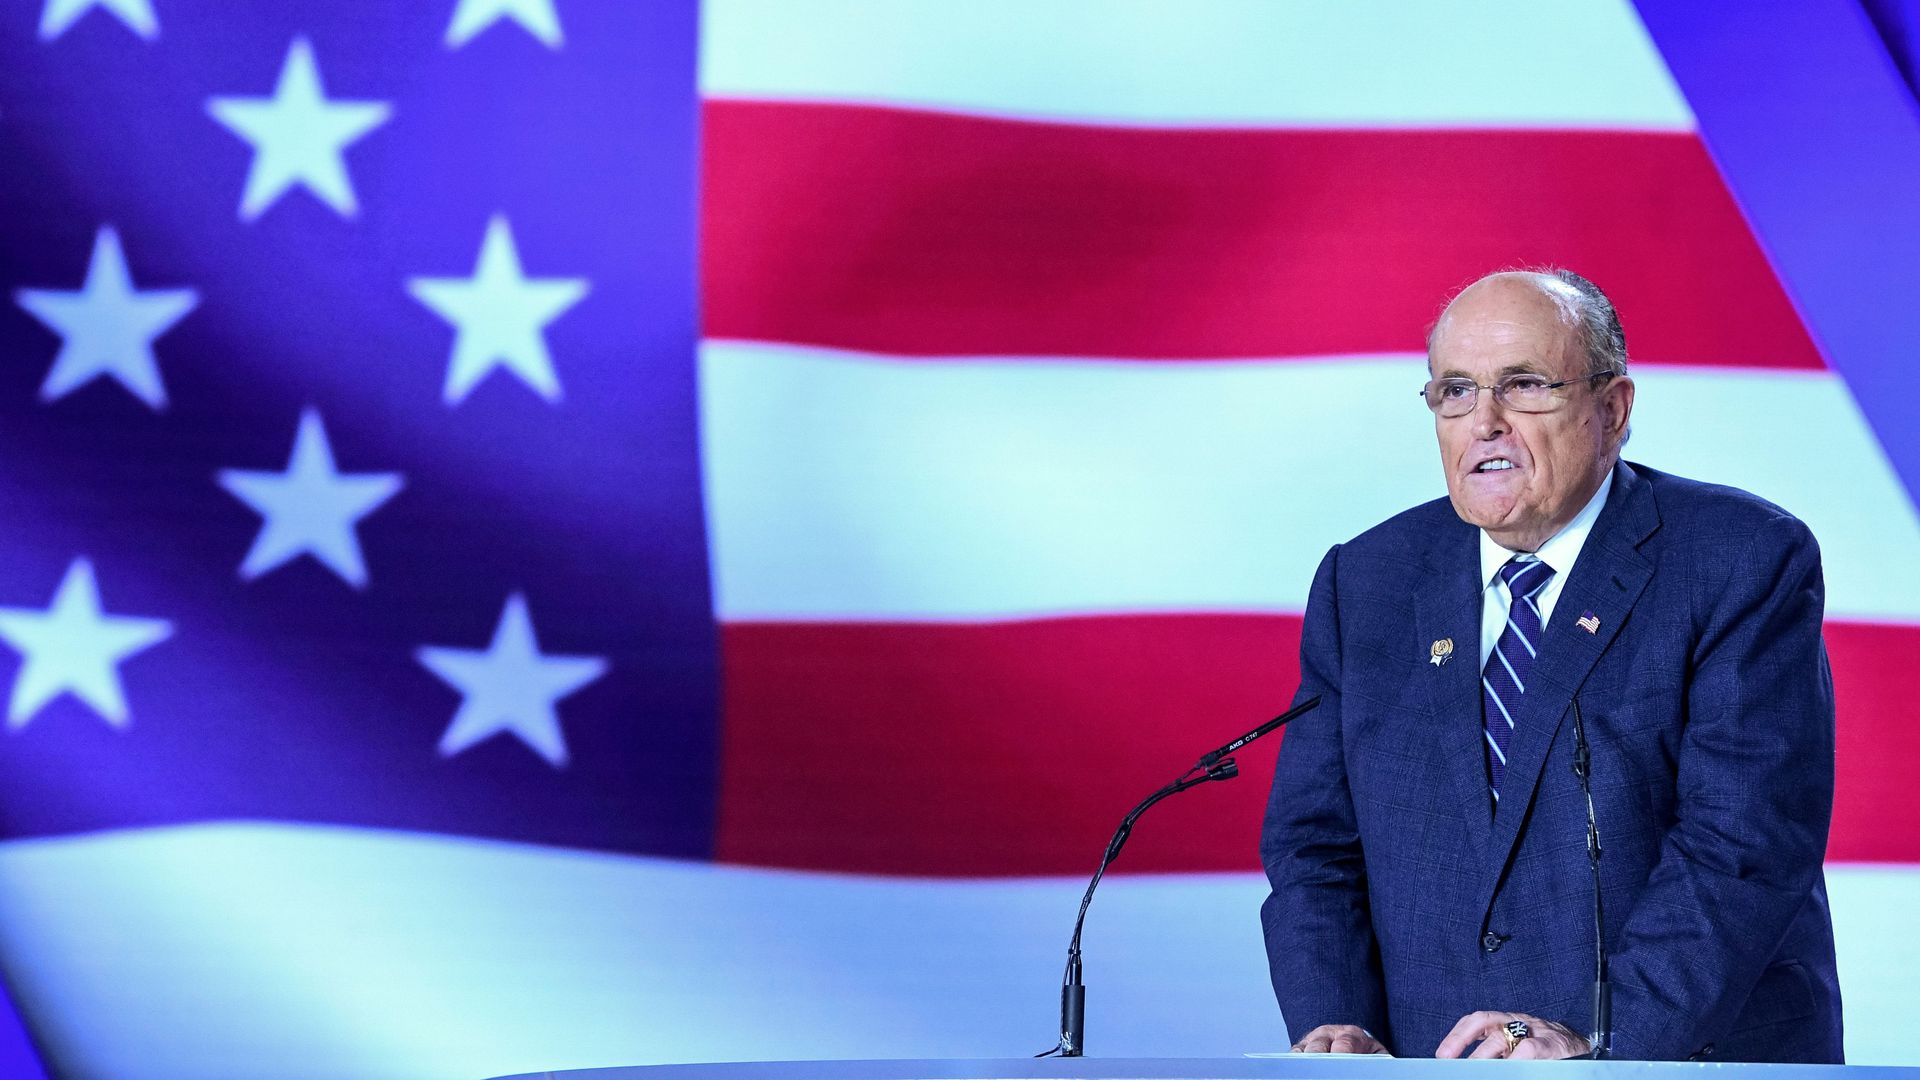 Former Mayor of New York City Rudy Giuliani gestures as he speaks during a conference